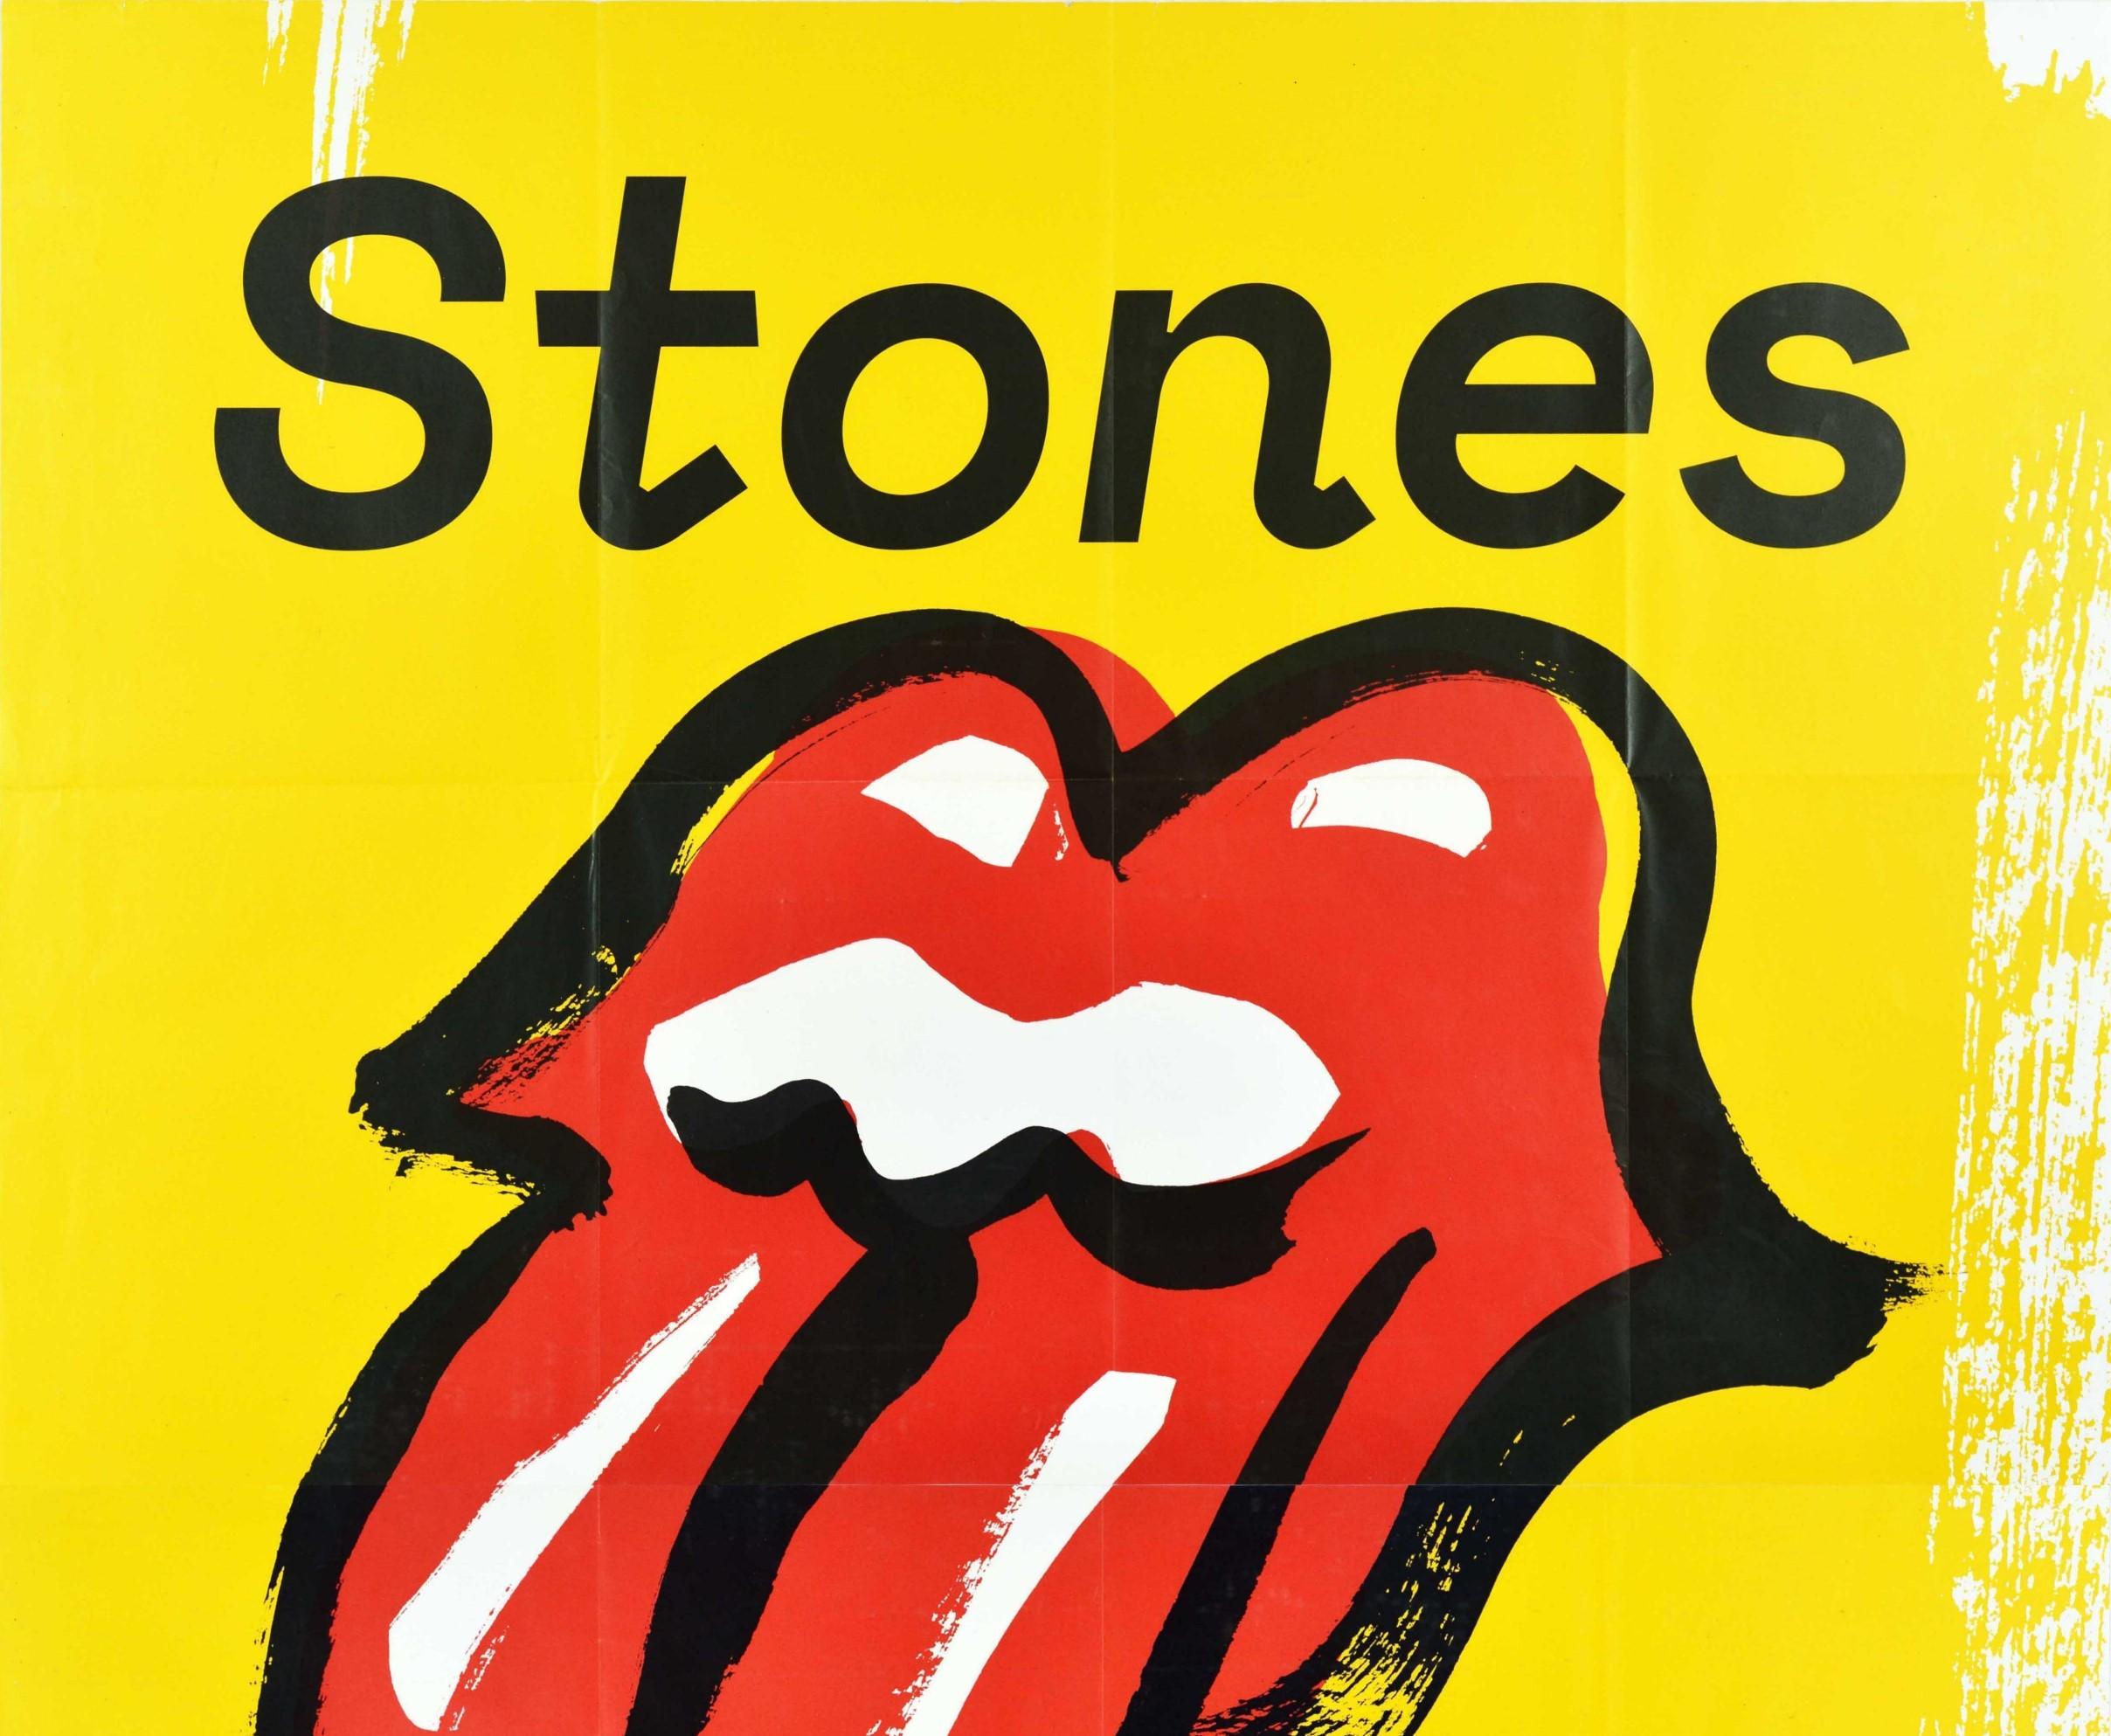 Original music concert poster promoting The Rolling Stones No Filter Tour Europe 2017 advertising their performance at the Olympiastadion Munchen / Munich on 12 September 2017, featuring the iconic Rolling Stones logo (aka Hot Lips logo) designed by